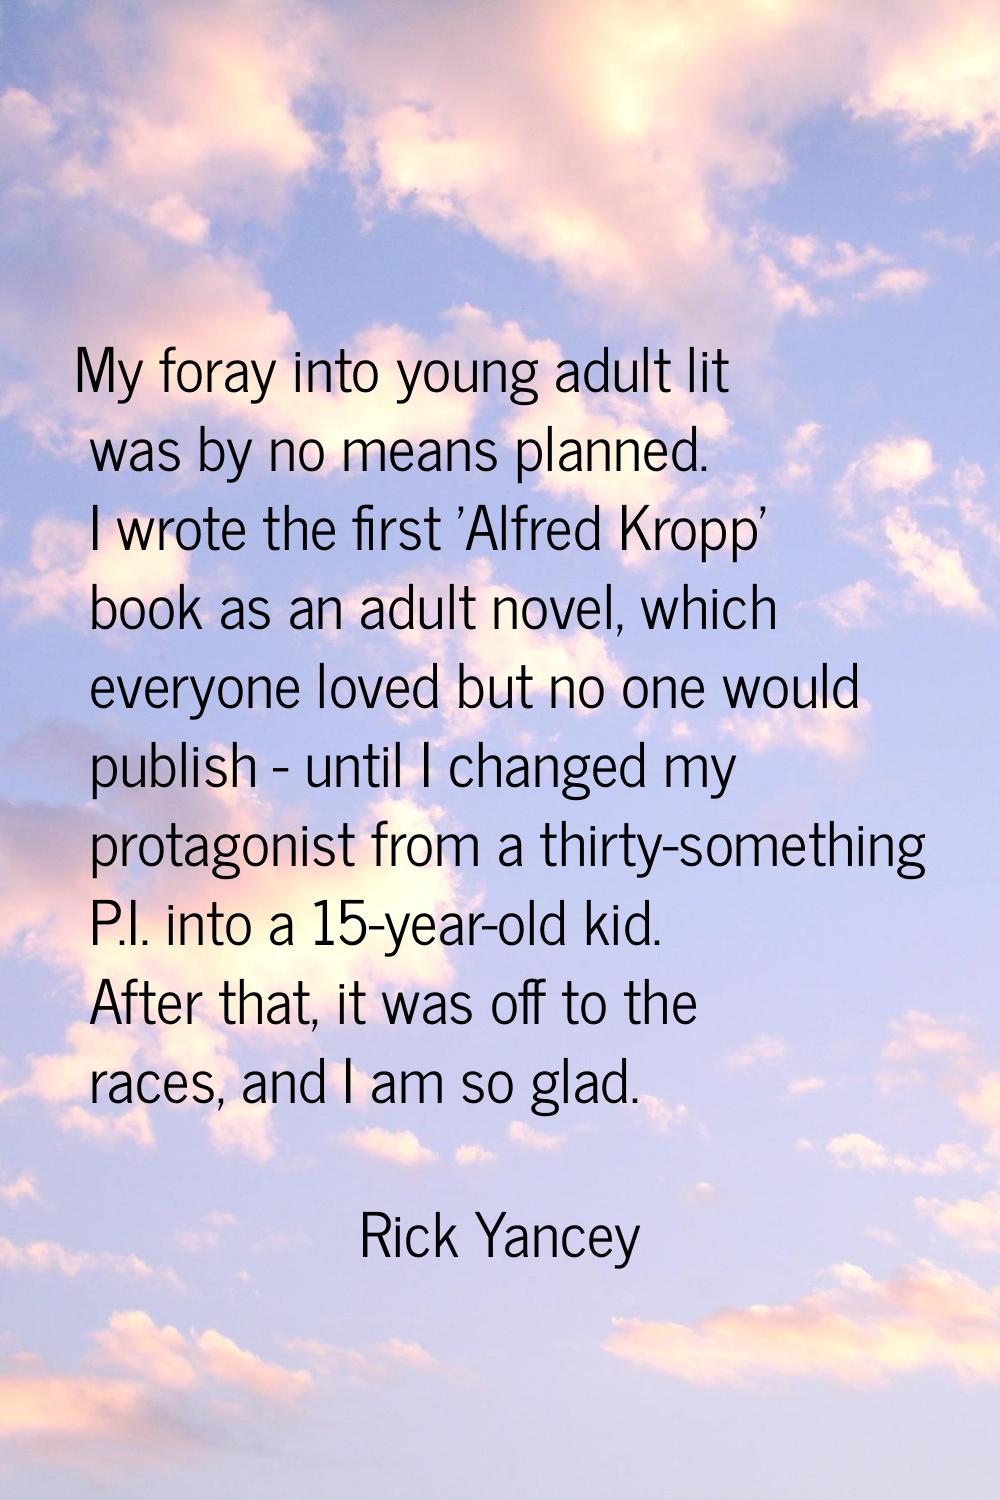 My foray into young adult lit was by no means planned. I wrote the first 'Alfred Kropp' book as an 